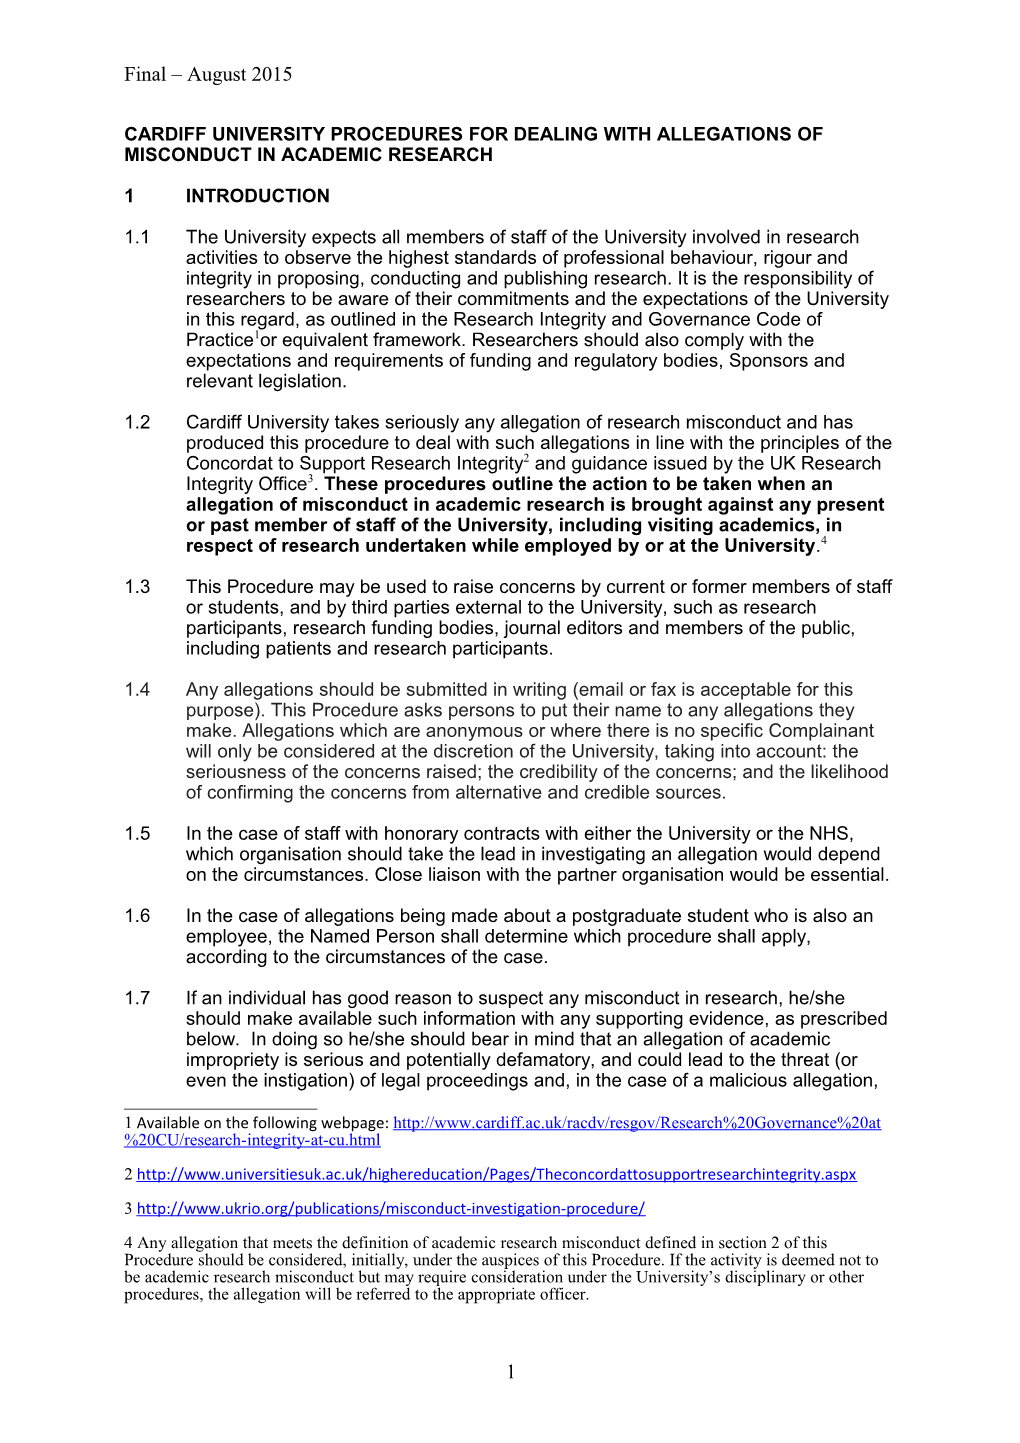 Cardiff University Procedures for Dealing with Allegations of Misconduct in Academic Research